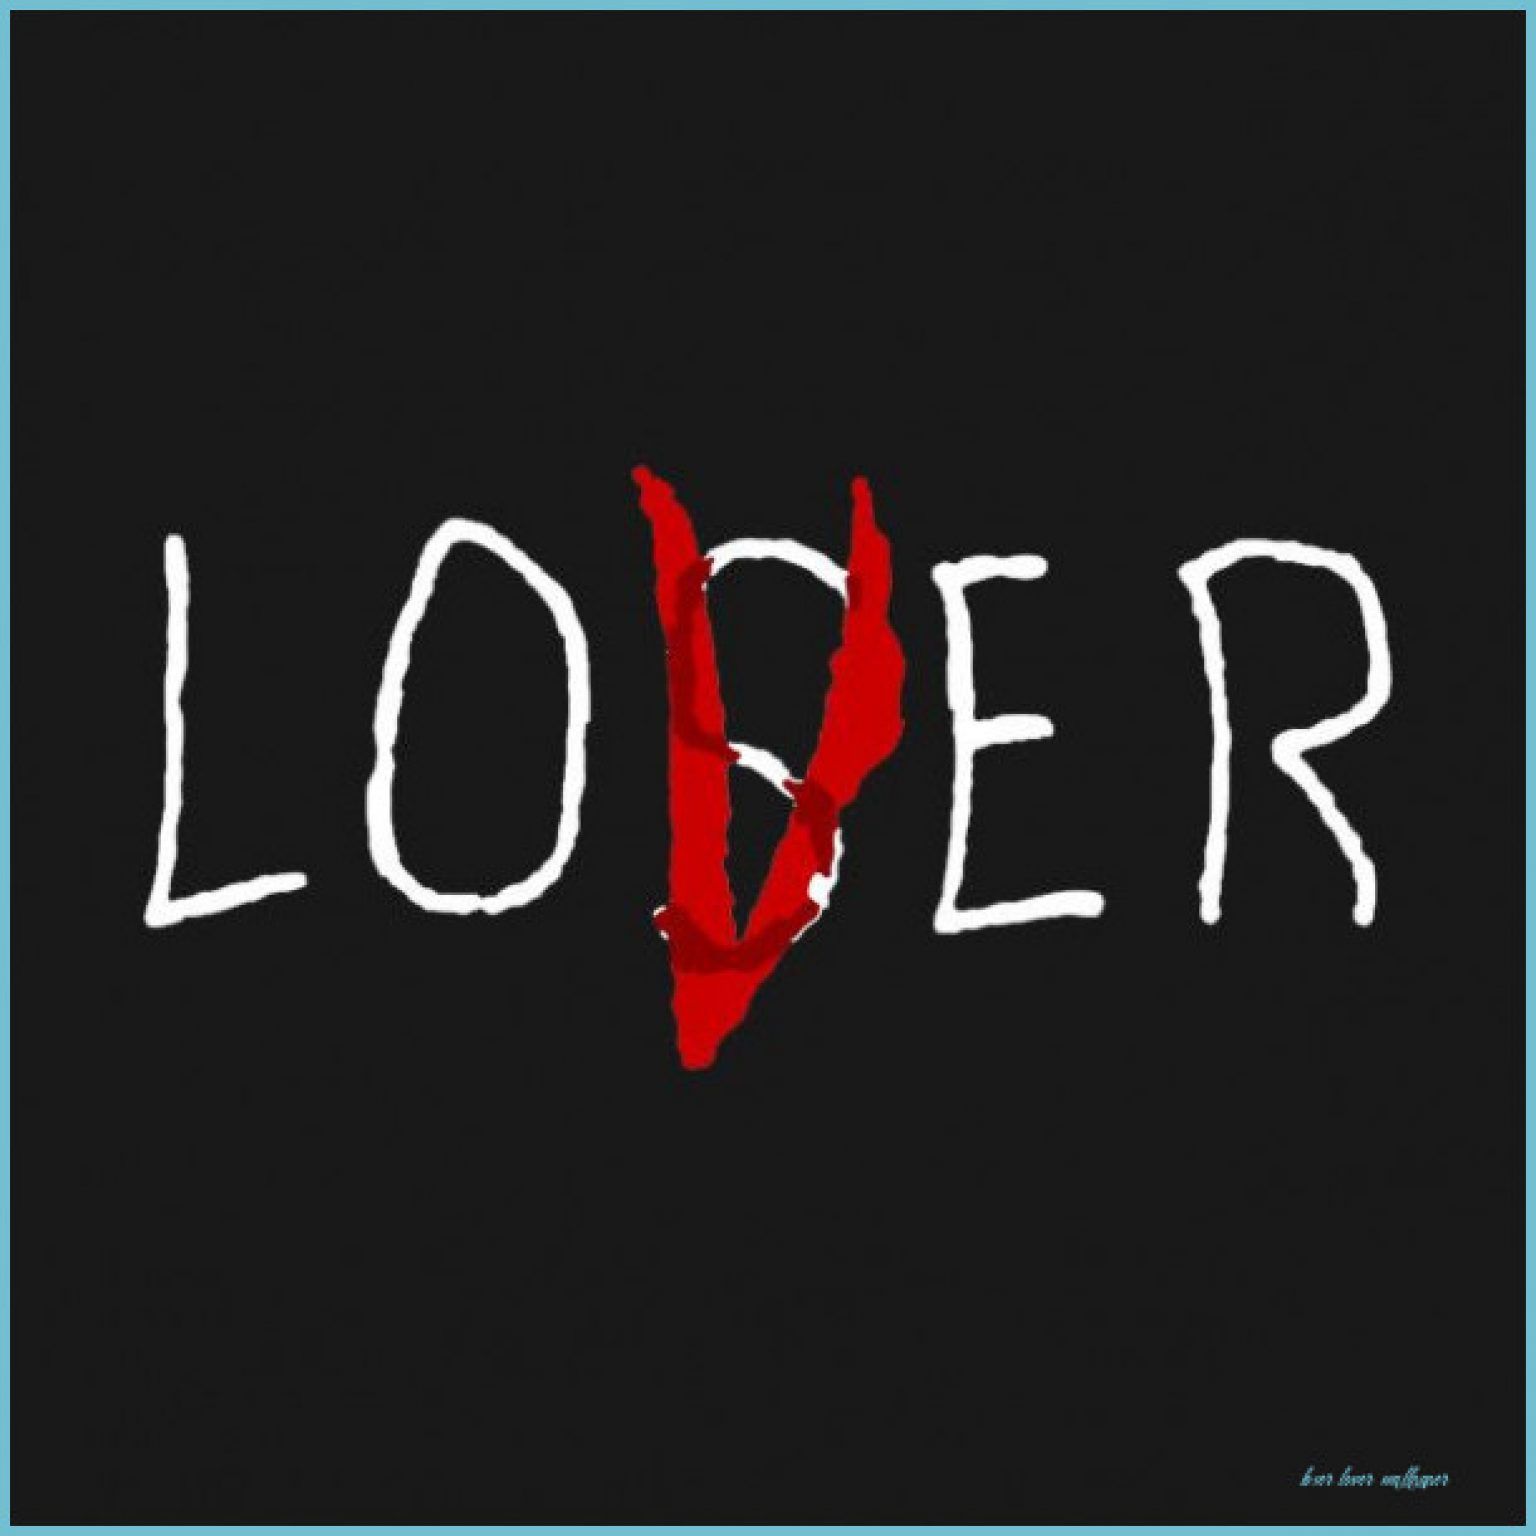 Check Out This Awesome 'Loser Lover' Design Lover Wallpaper